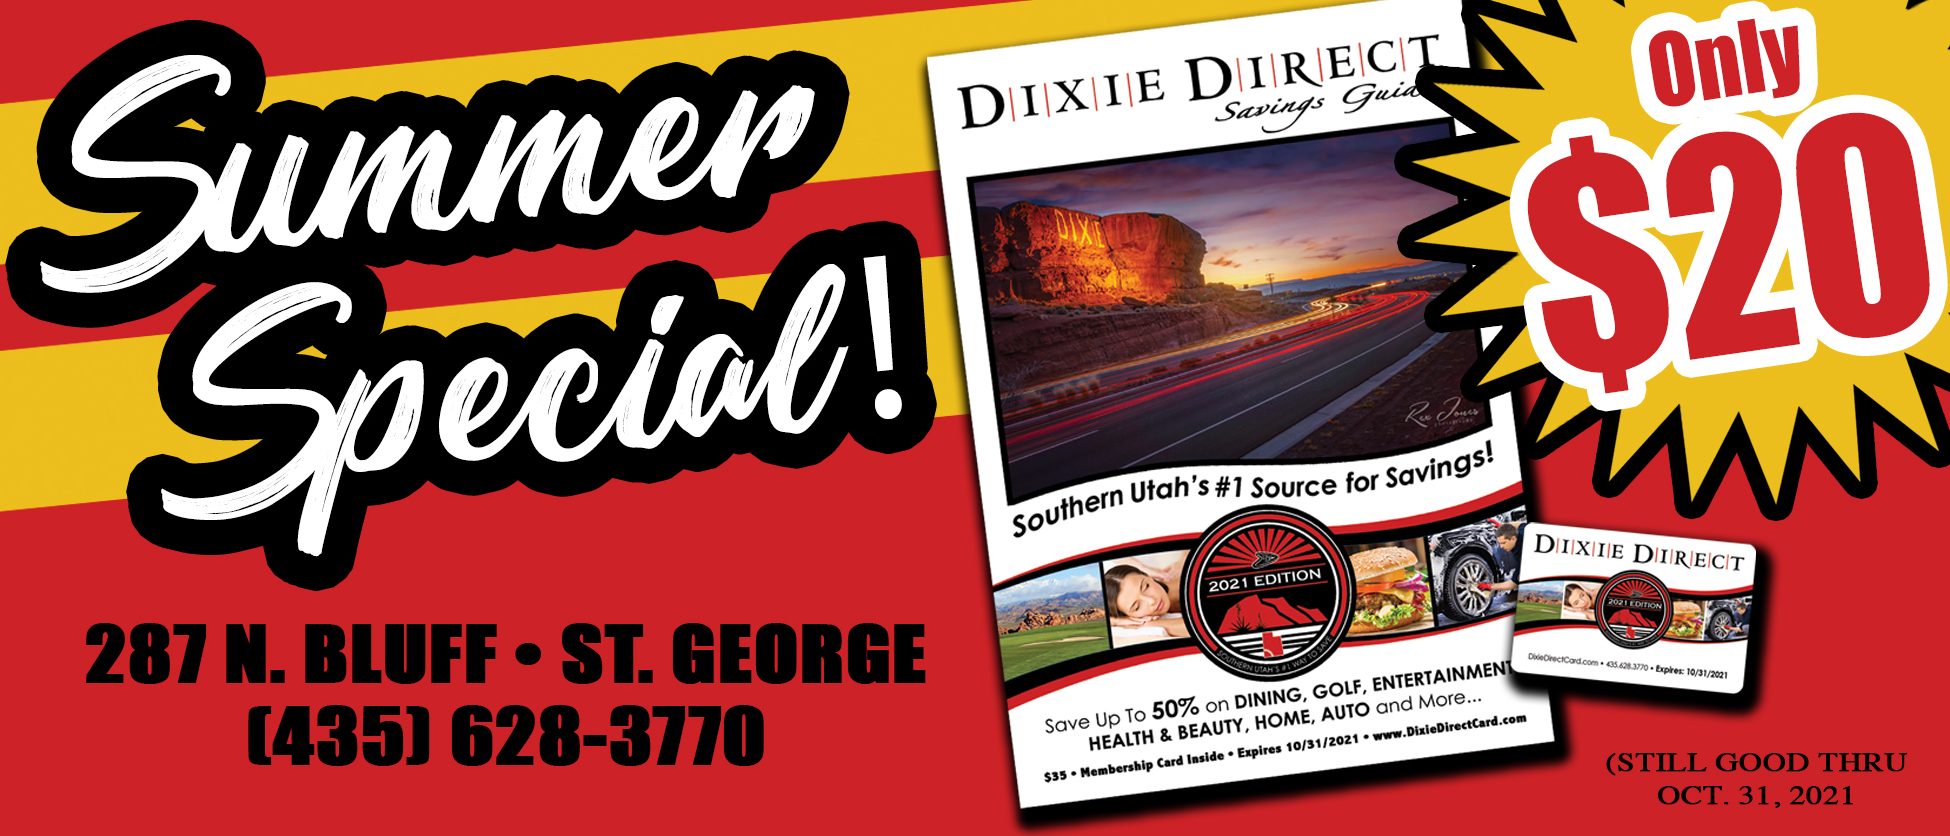 Dixie Direct Southern Utah Discounts Golf, Dining, Hotels, Travel